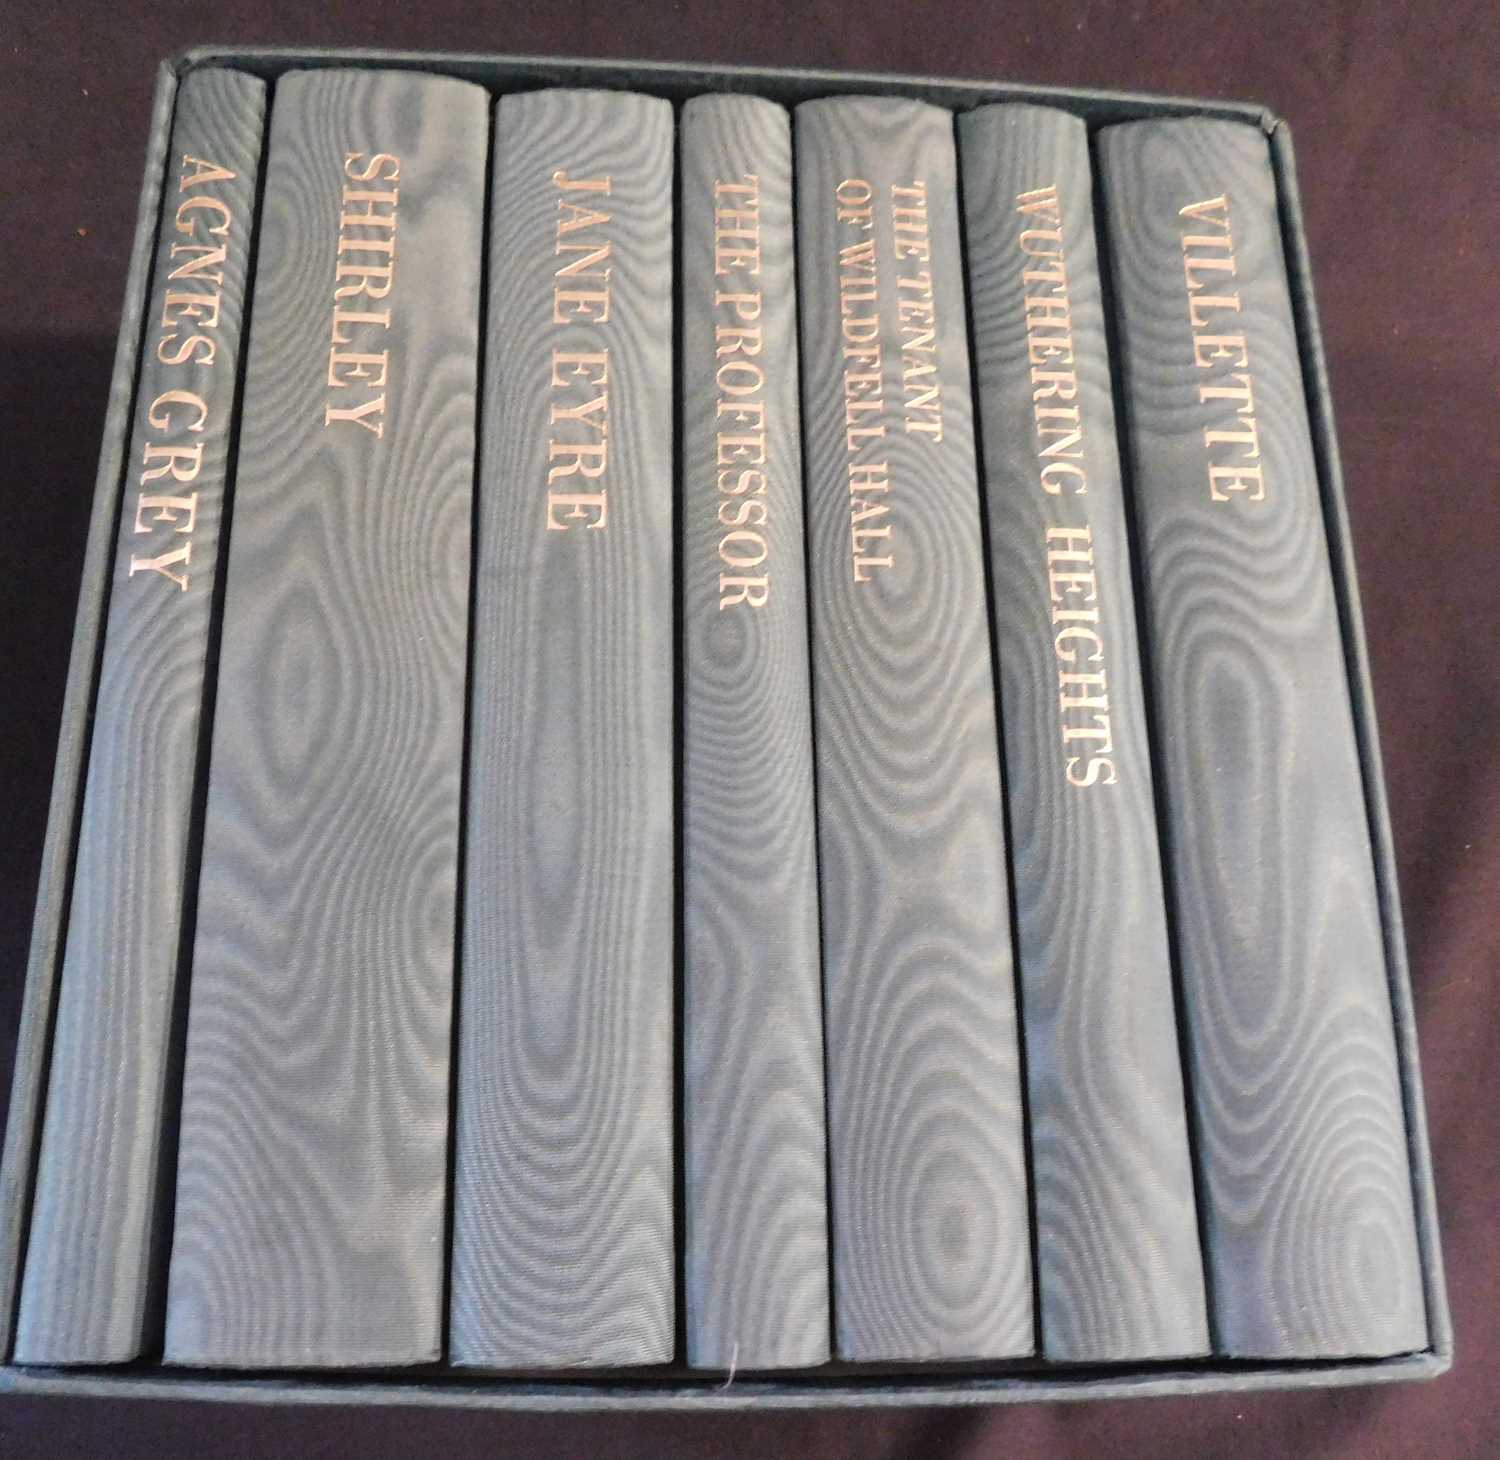 CHARLOTTE, EMILY AND ANNE BRONTE: WORKS, London, The Folio Society, 1993, 7 vols, original watered